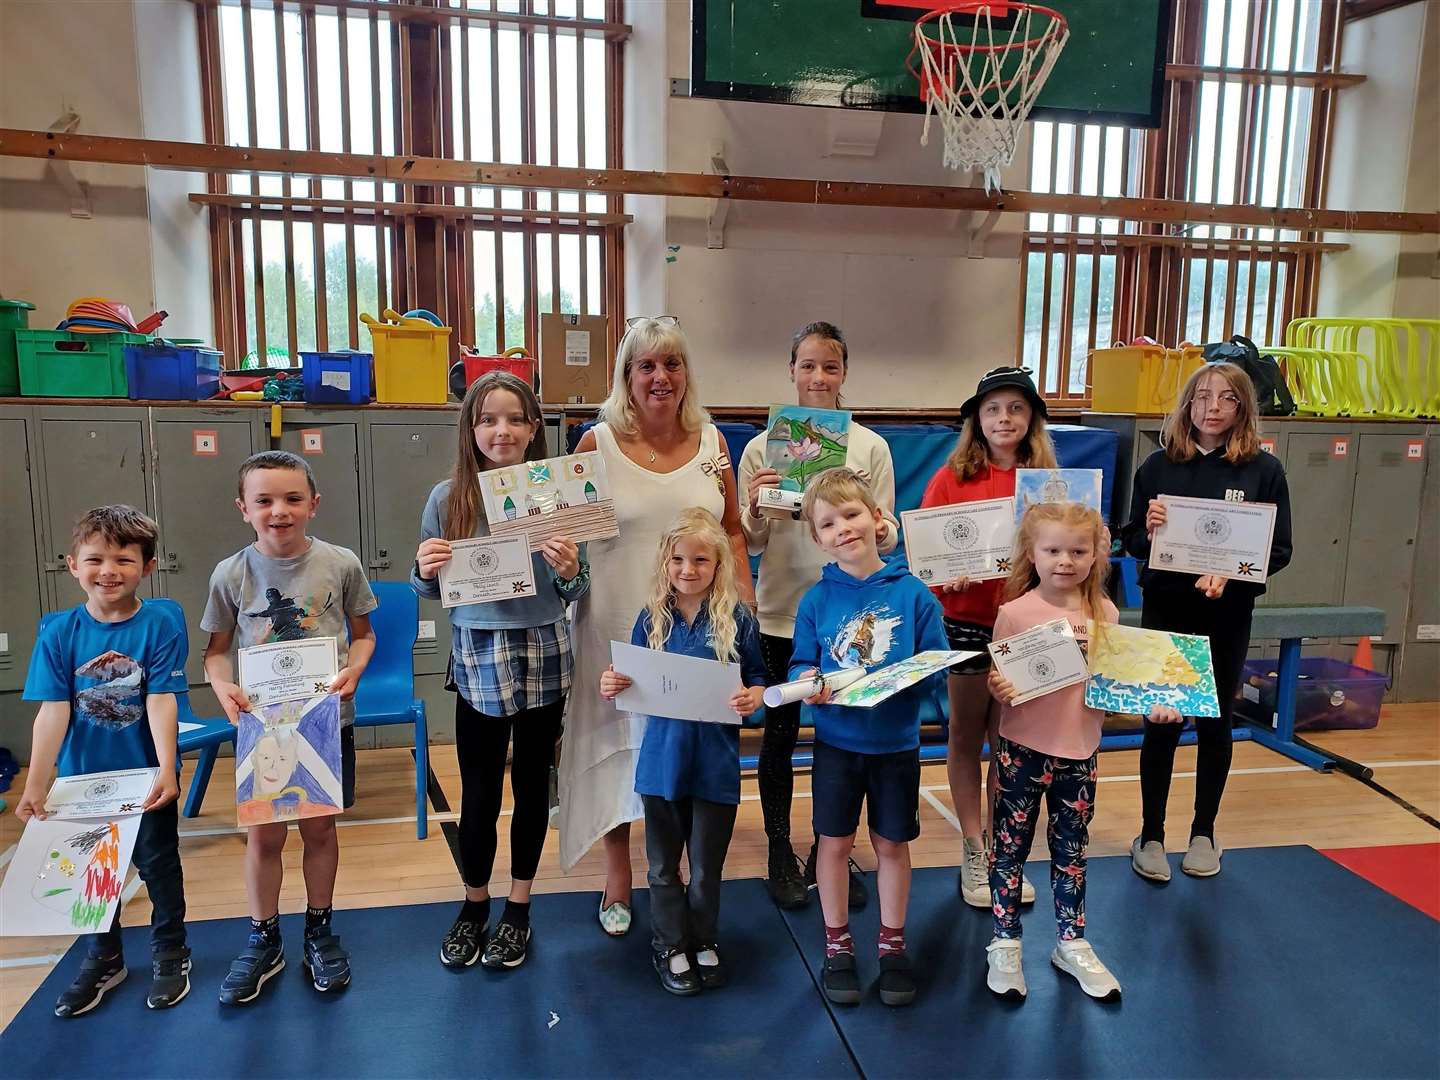 Vice Lord-Lieutenant Kim Tulloch with the winning pupils at Dornoch Primary School – Oli Whiteman (nursery); Henry MacCarthy (P1-3); and Maisie Levens (P4-7) – as well as pupils who received head teacher's special awards.